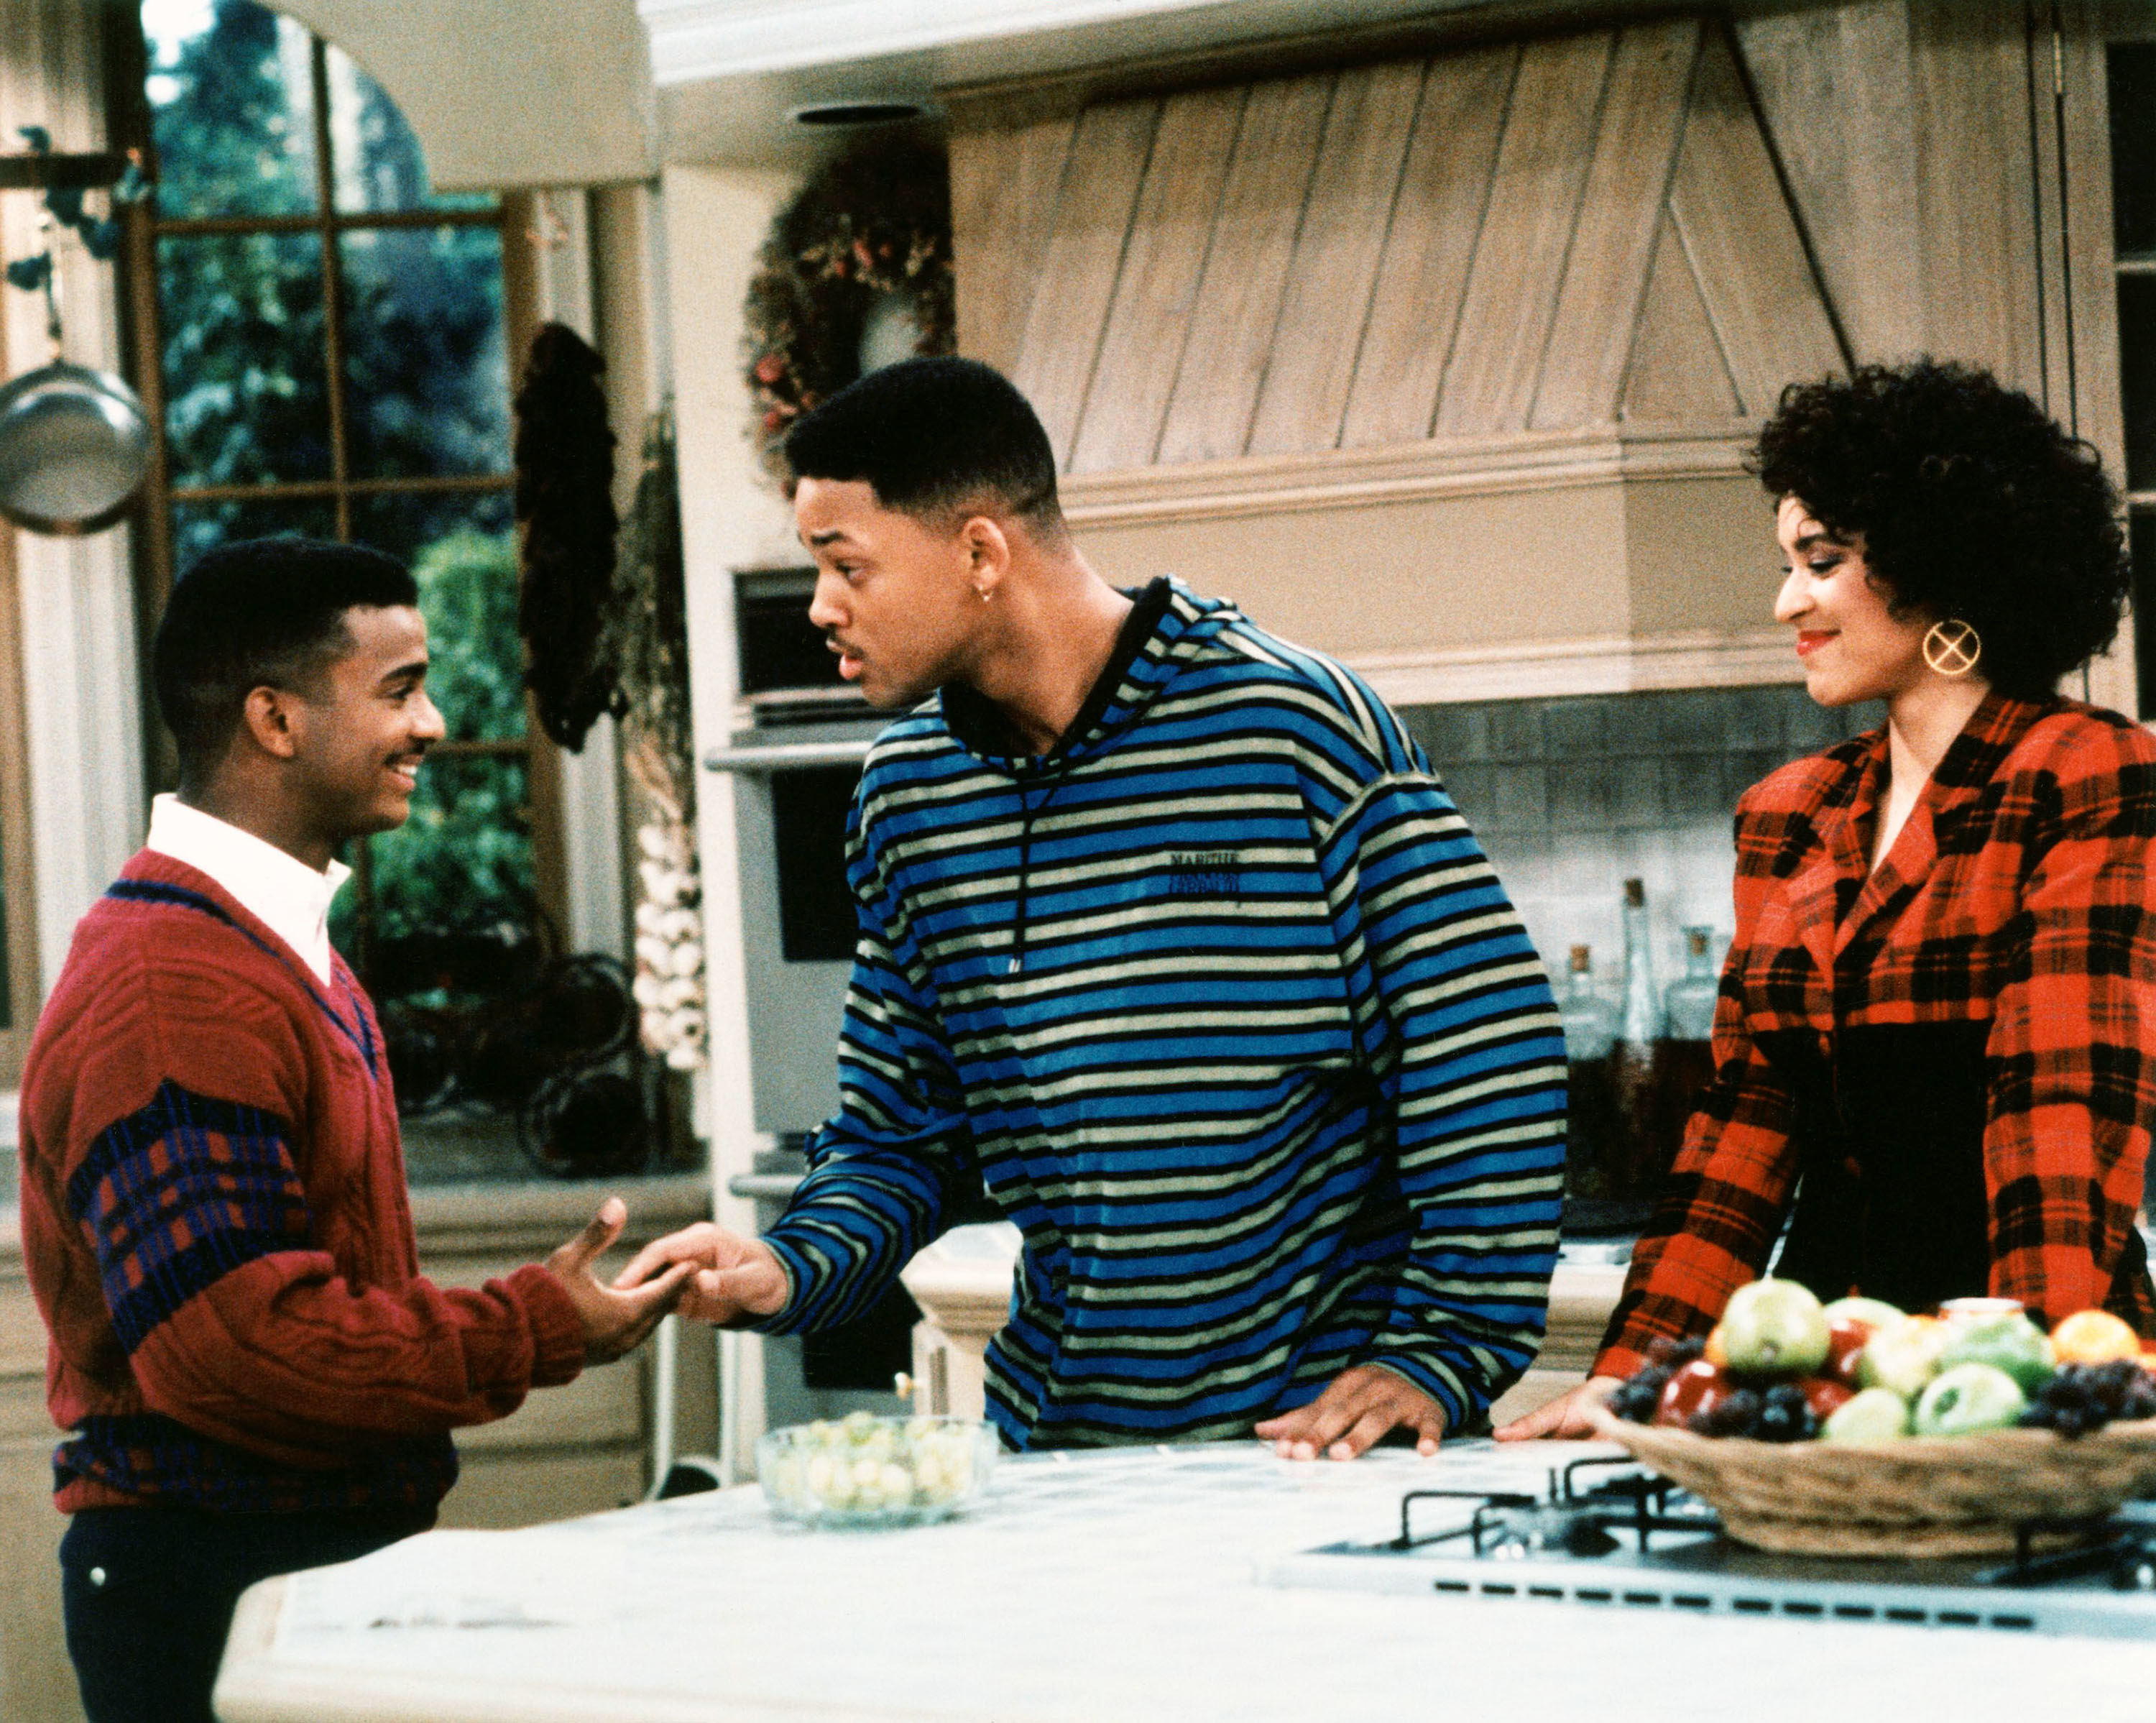 Alfonso Ribeiro, Will Smith, and Karyn Parsons talking in the kitchen.